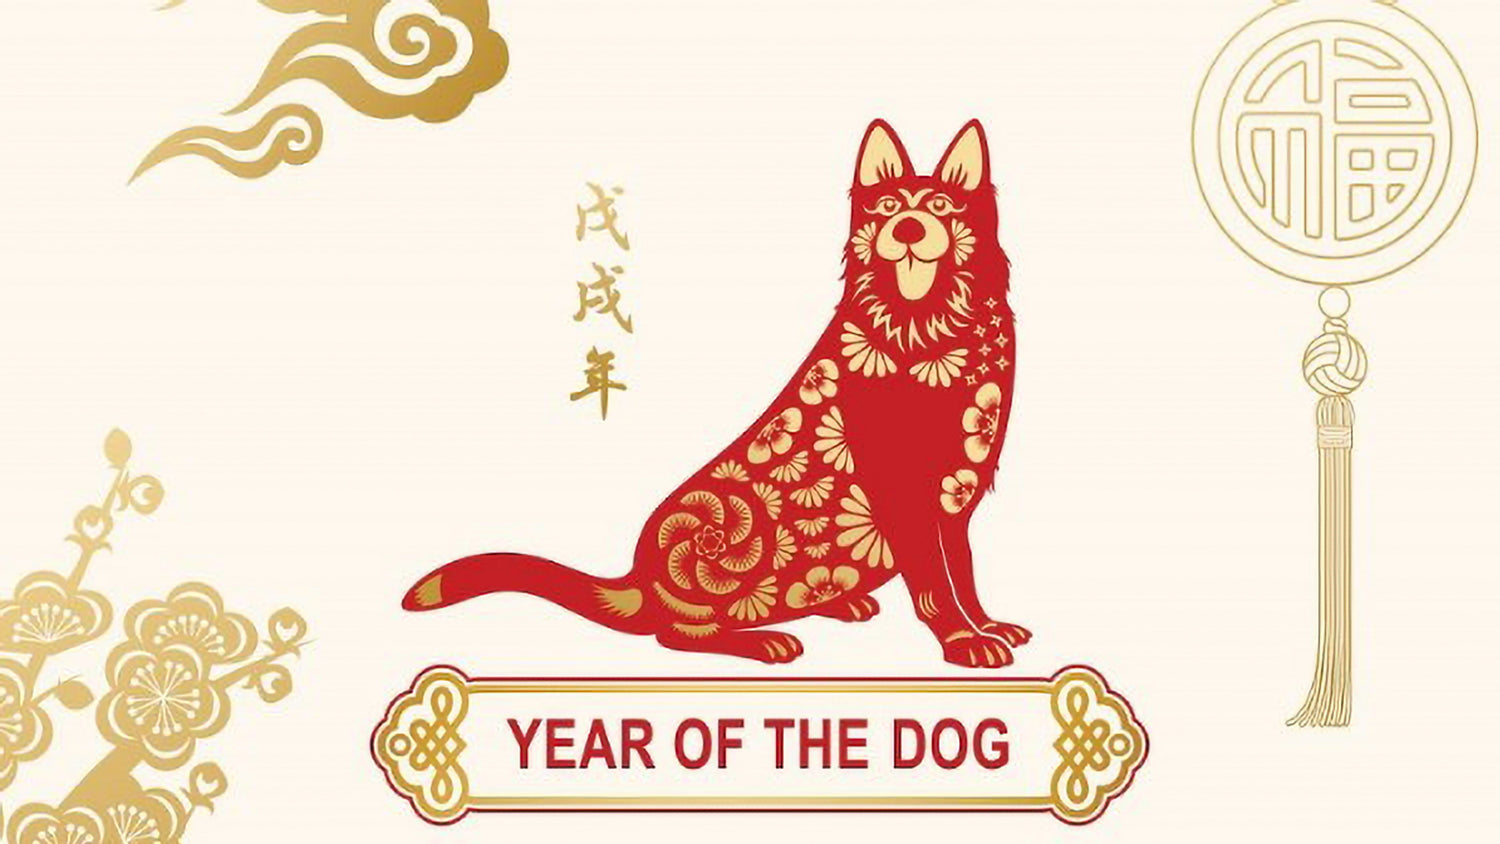 Welcoming the Year of the Dog